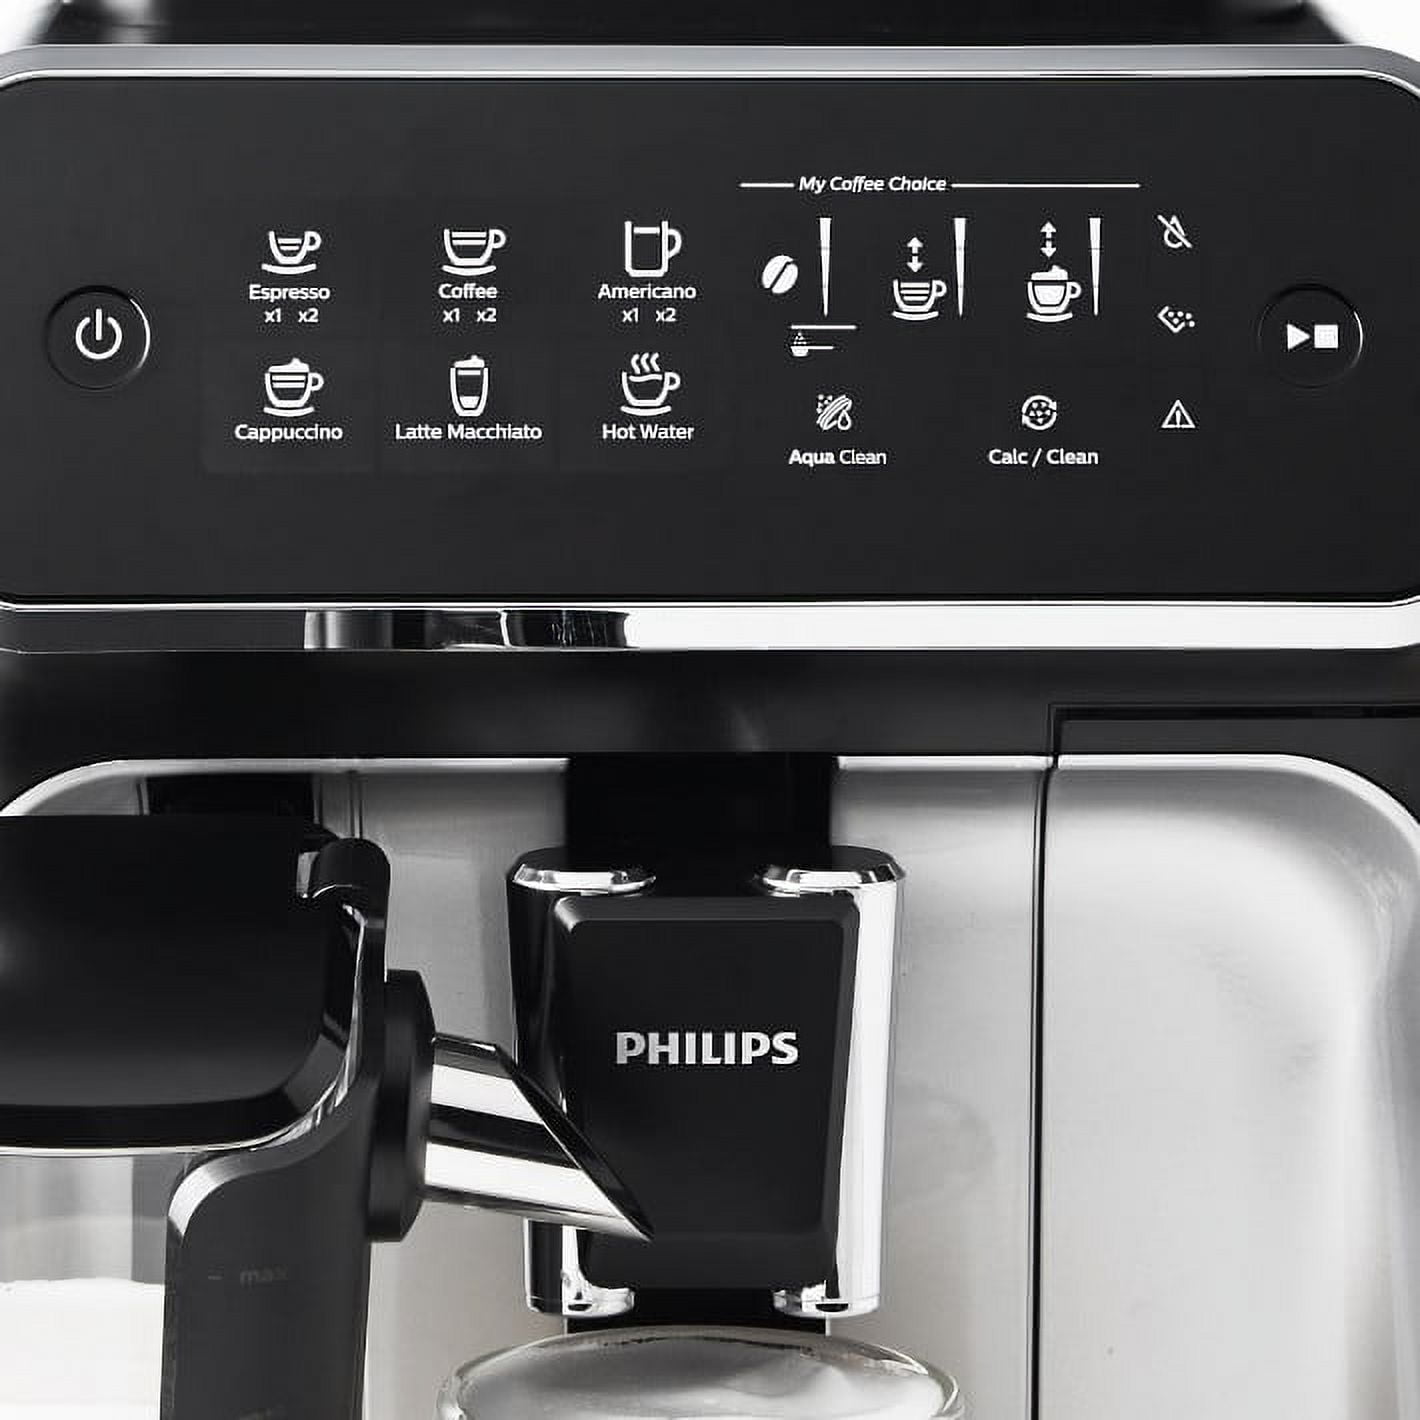 Just unbox: Philips 3300 series full automatic espresso machine (no  comments) 